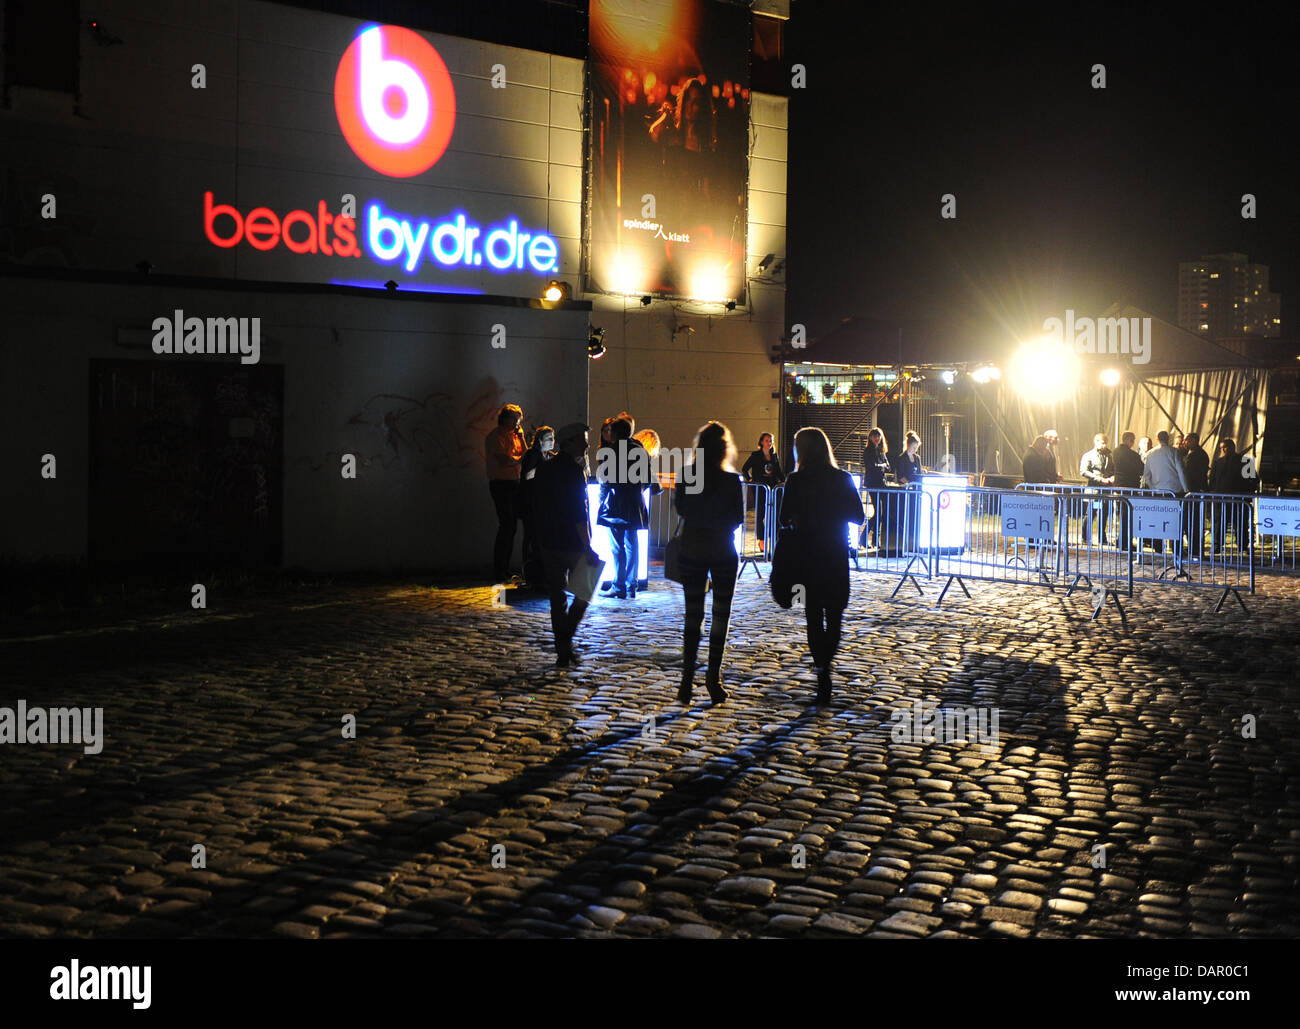 Guests arrive at the event 'Ibiza to Berlin' at the Spindler & Klatt club in Berlin, Germany, 06 September 2011. The label Beats by Dr. Dre Headphone held a launch party for new headphones. Photo: Jens Kalaene Stock Photo